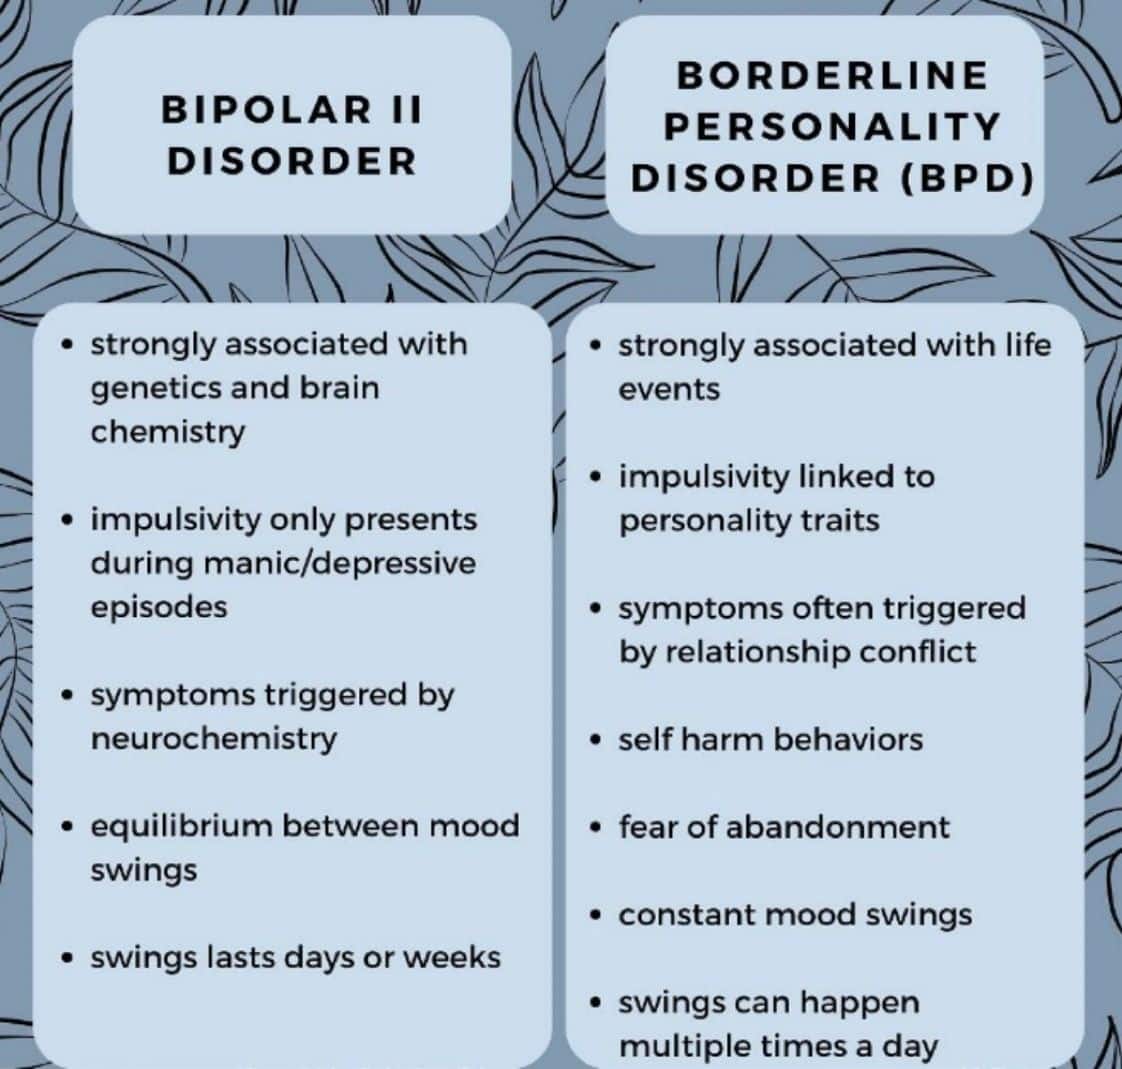 What Are The Characteristics Of A Borderline Personality Disorder